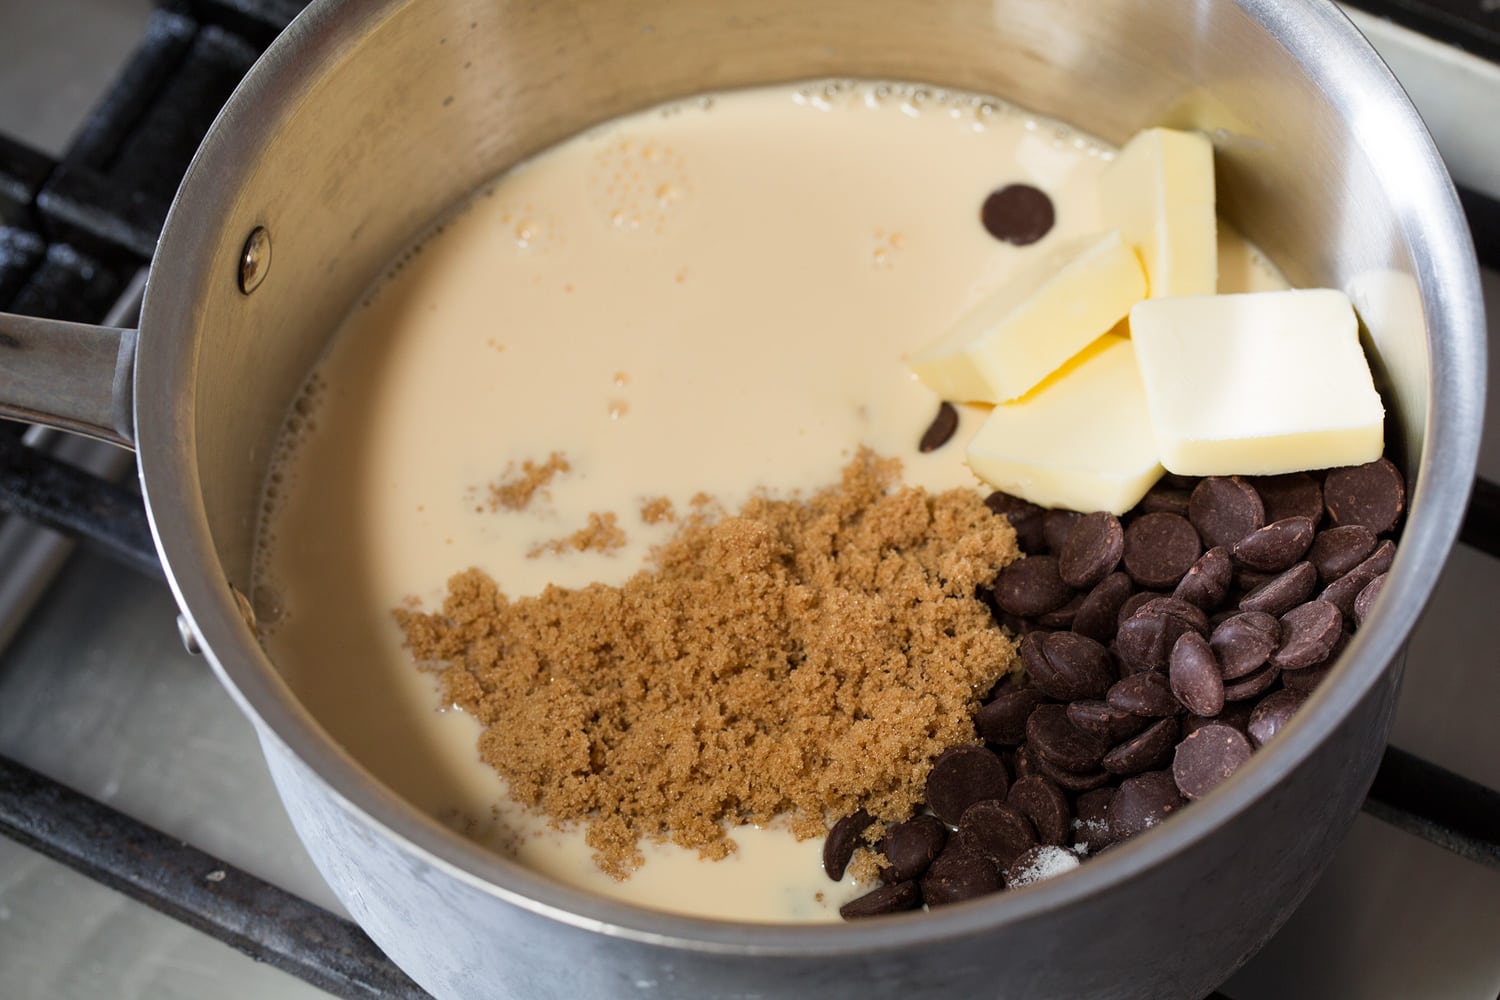 Hot fudge ingredients in saucepan before mixing and cooking.